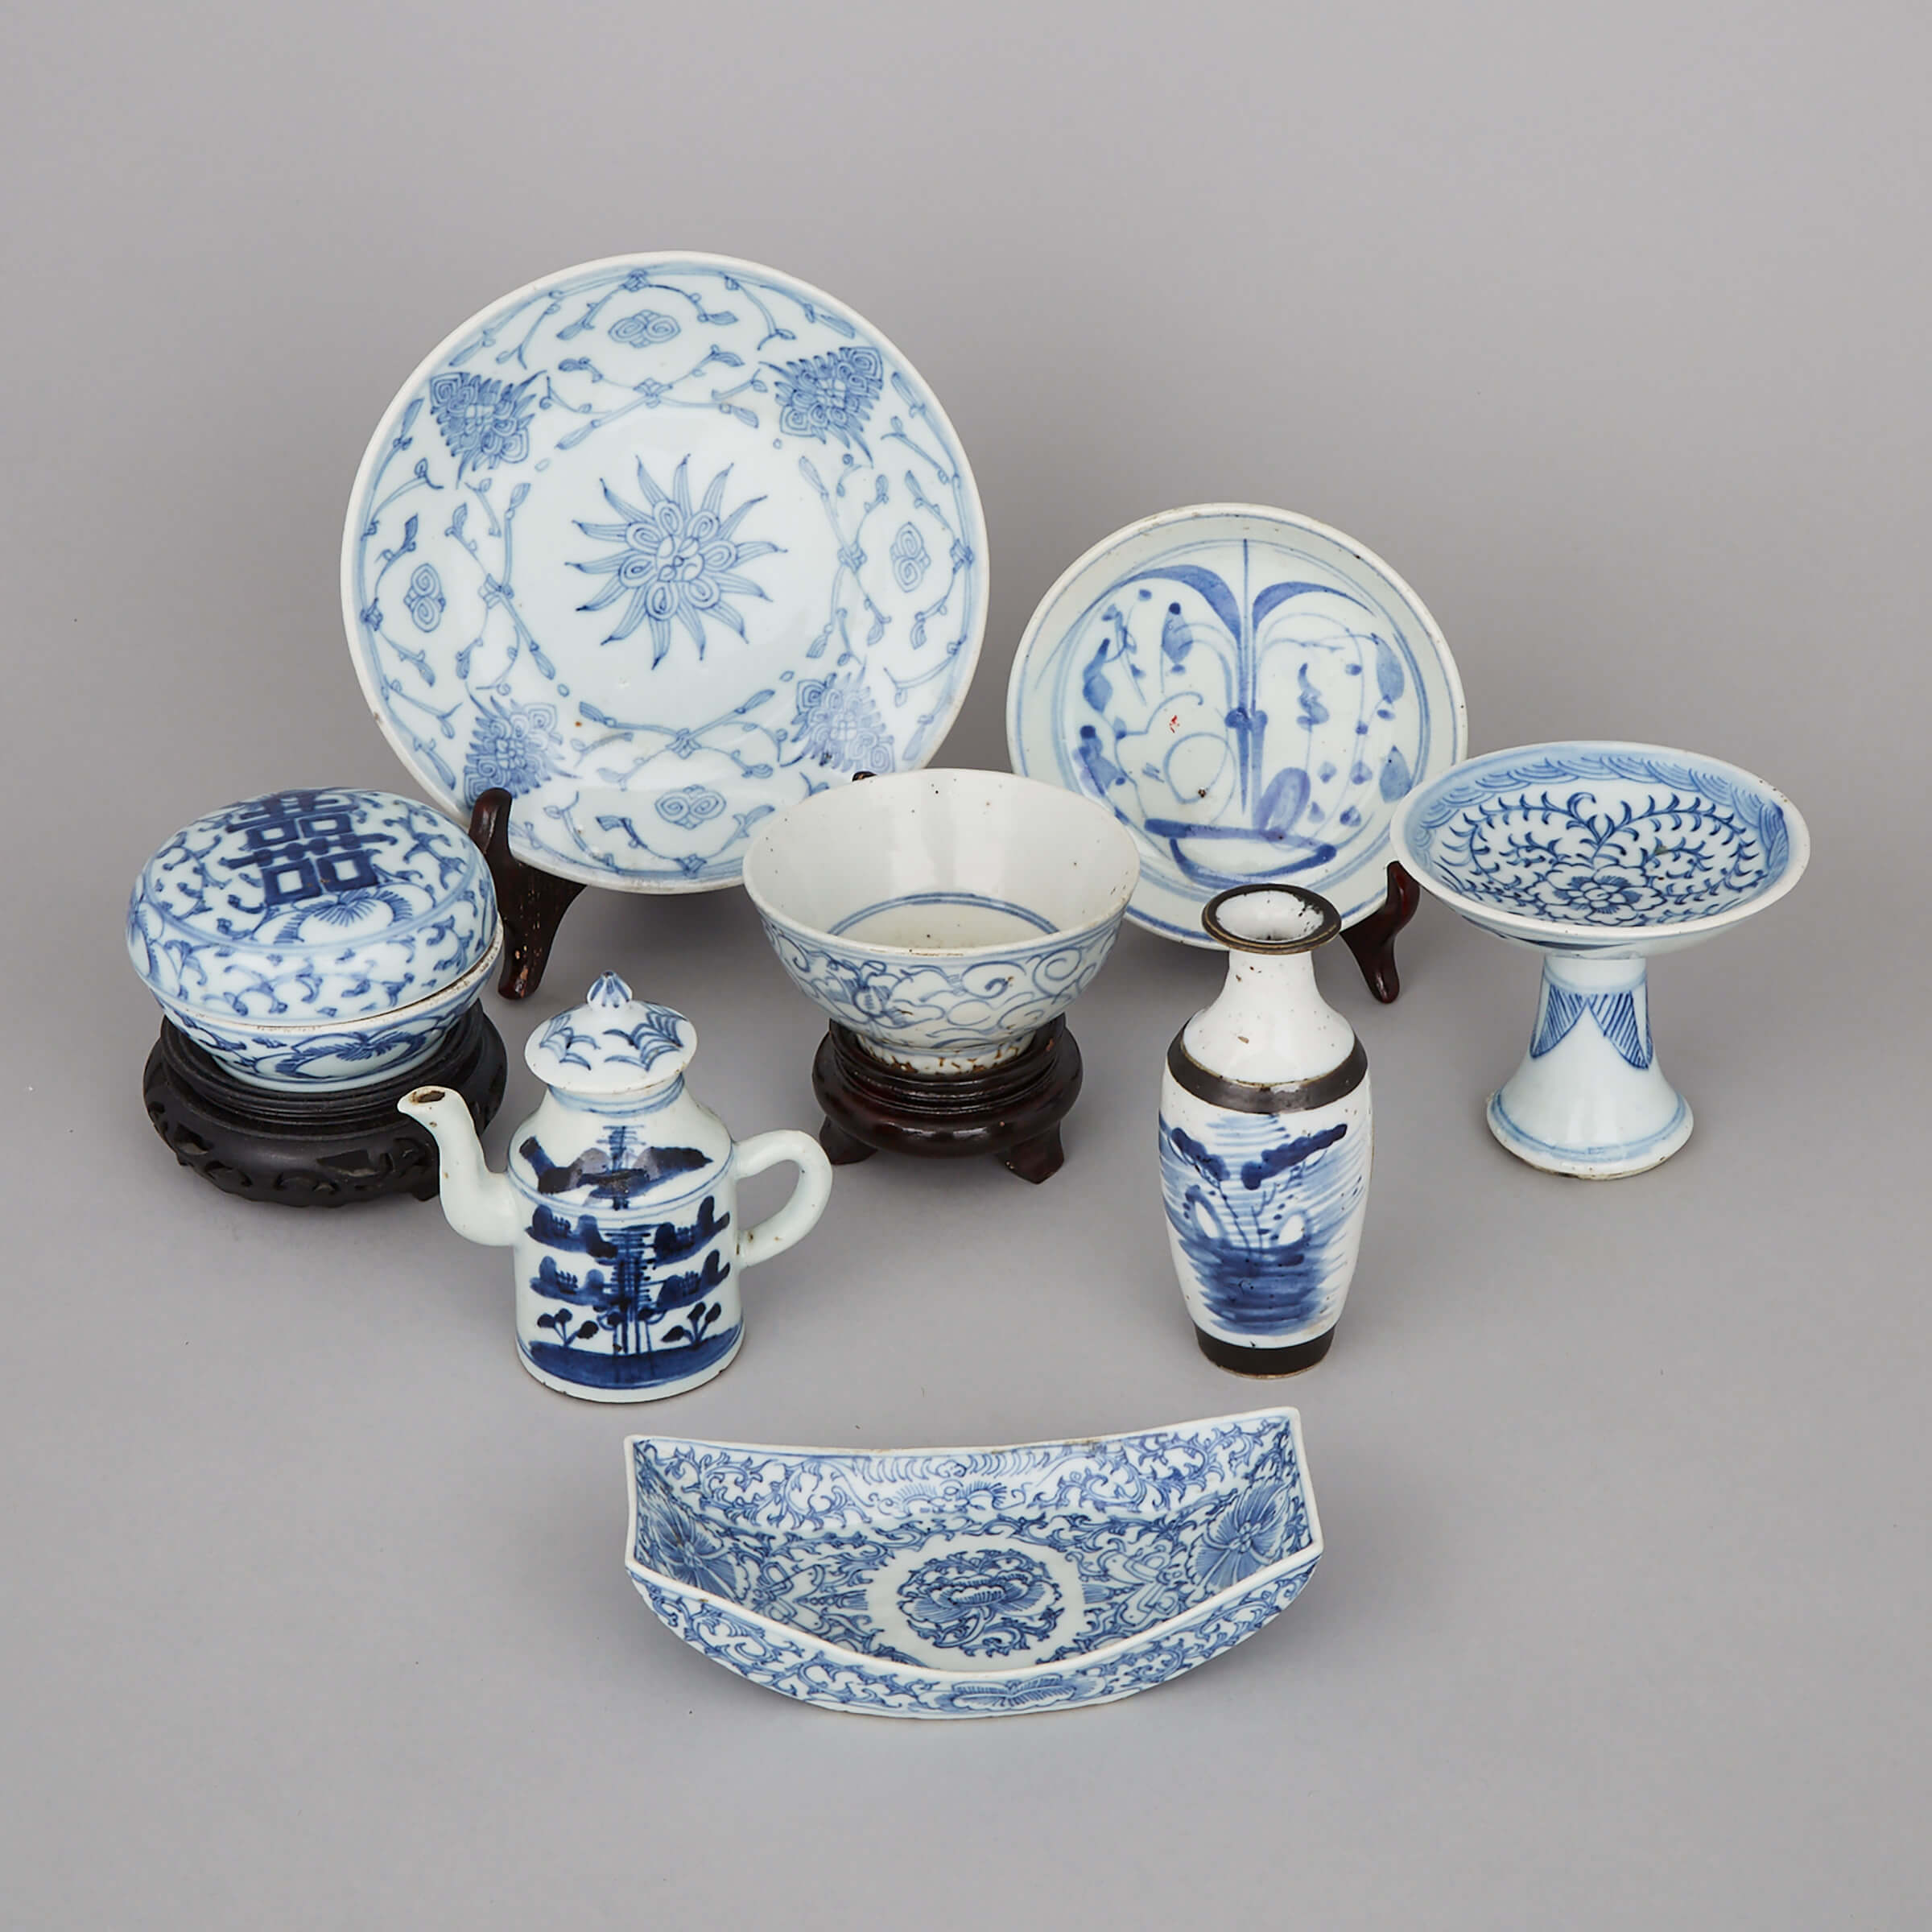 A Group of Eight Blue and White Wares, 19th/Early 20th Century